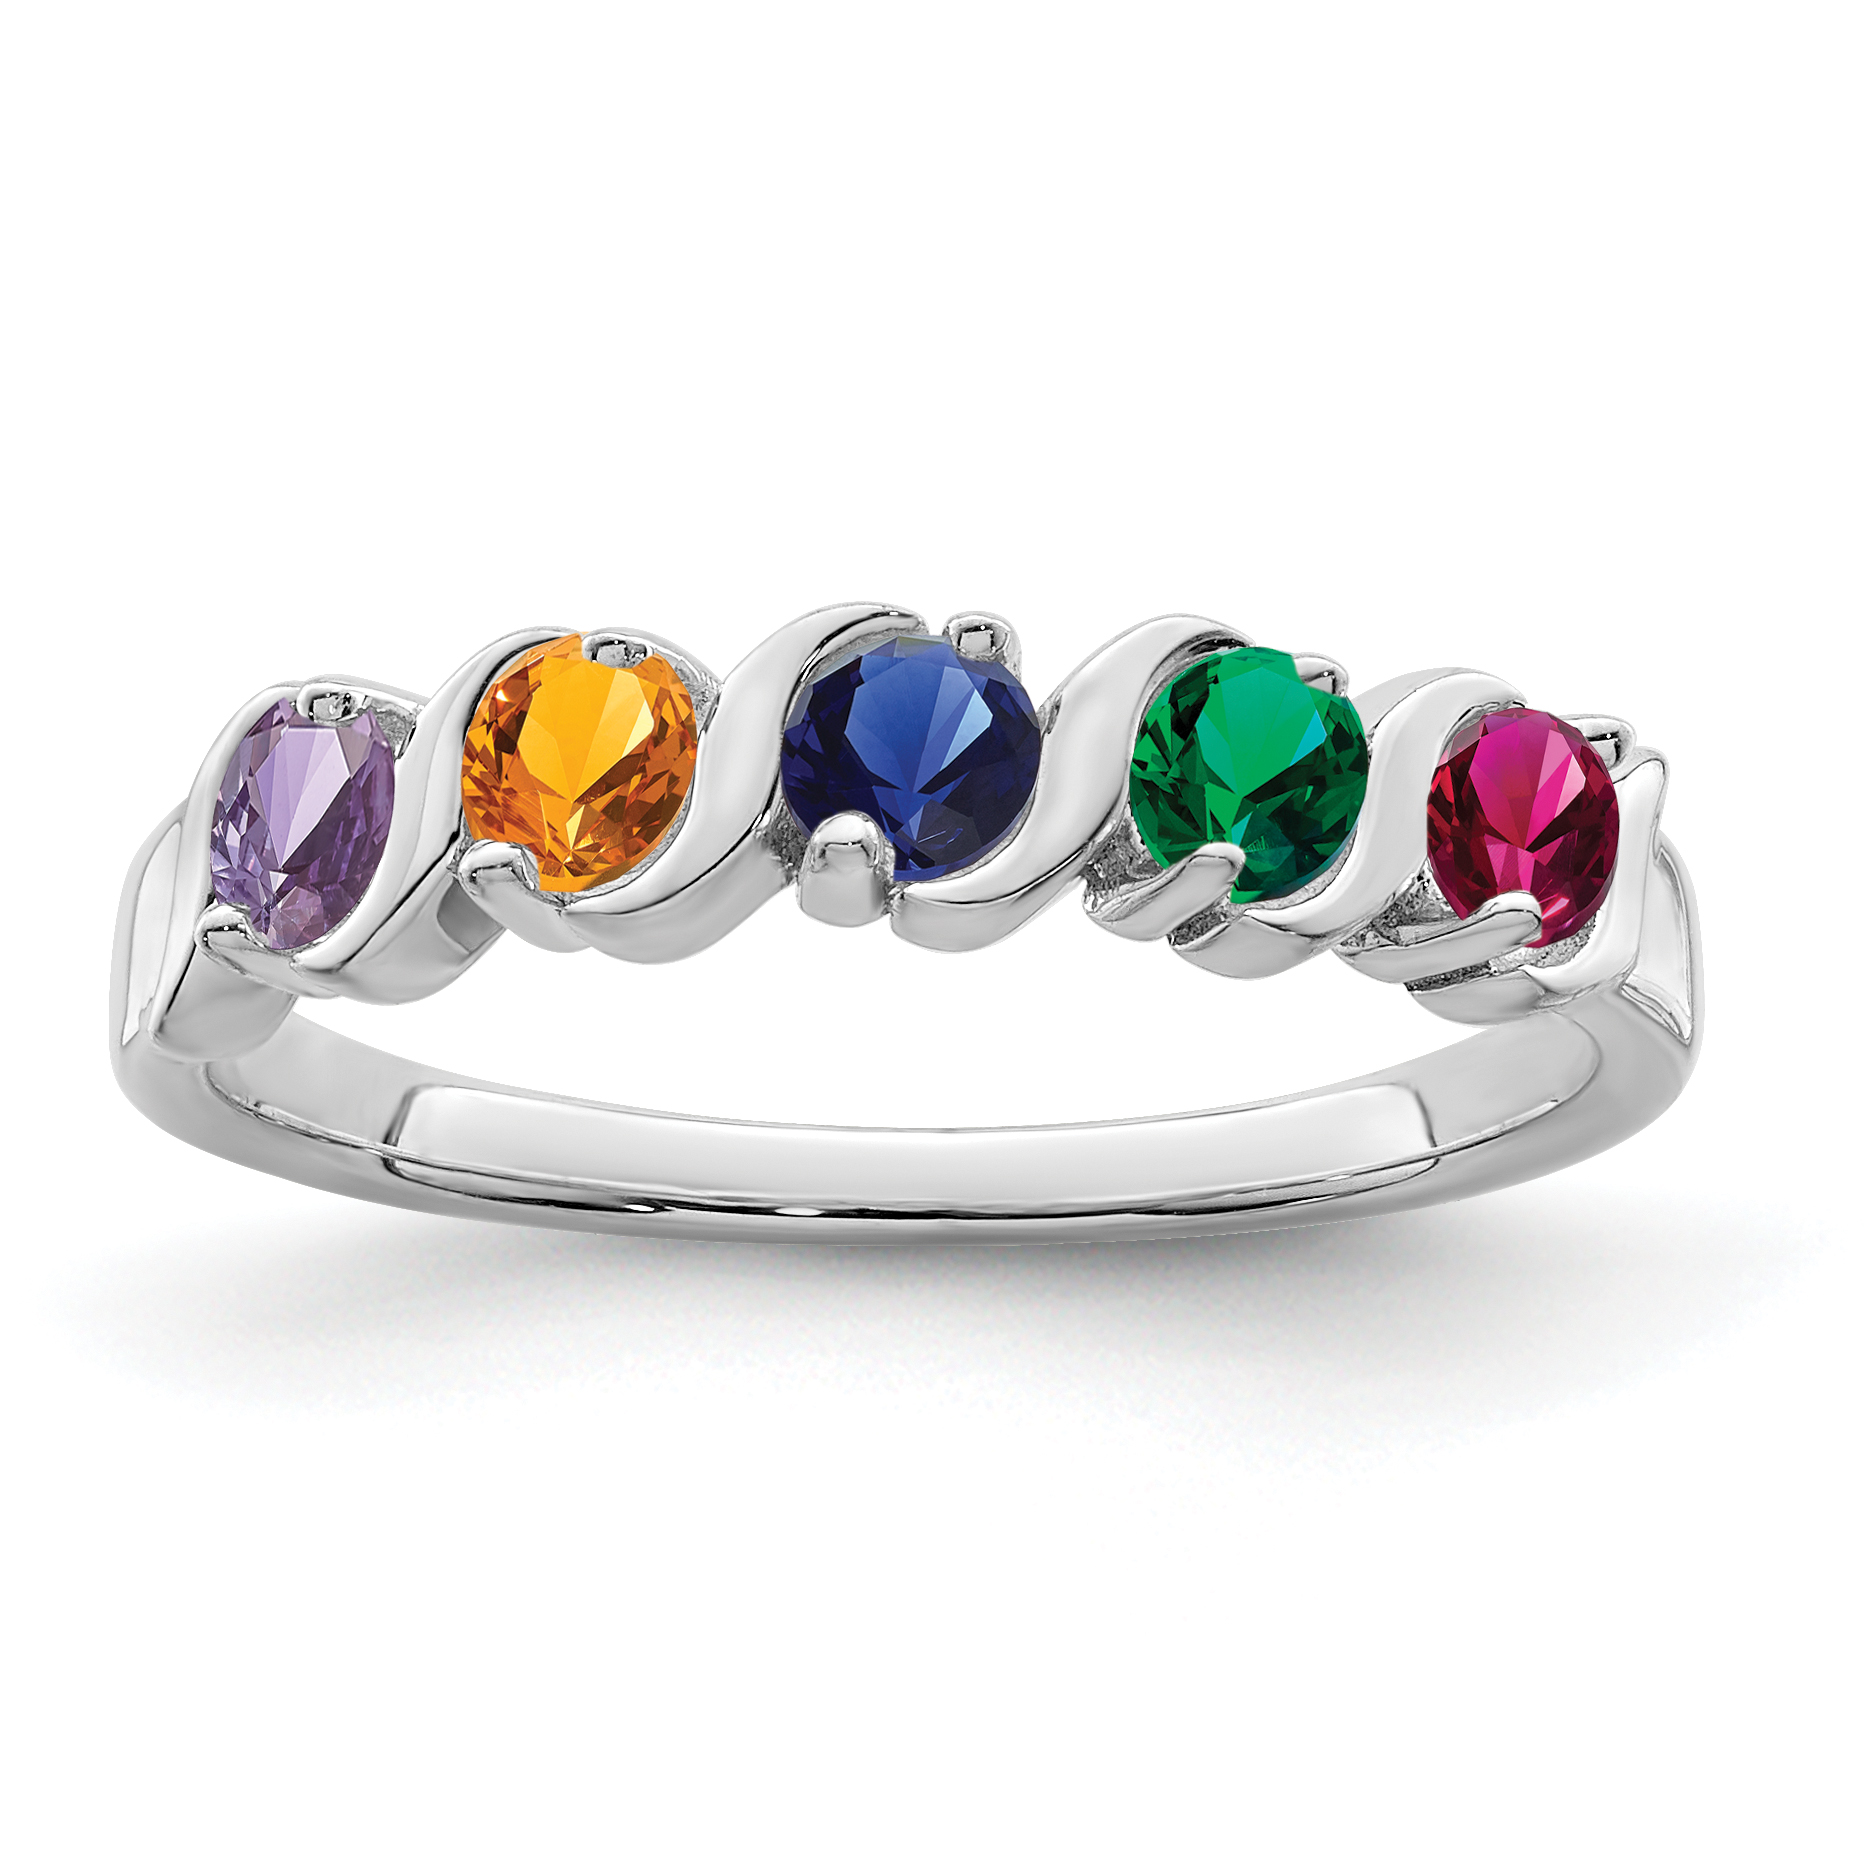 Family Celebration Sterling Silver Synthetic 5 Stone Mother's Ring